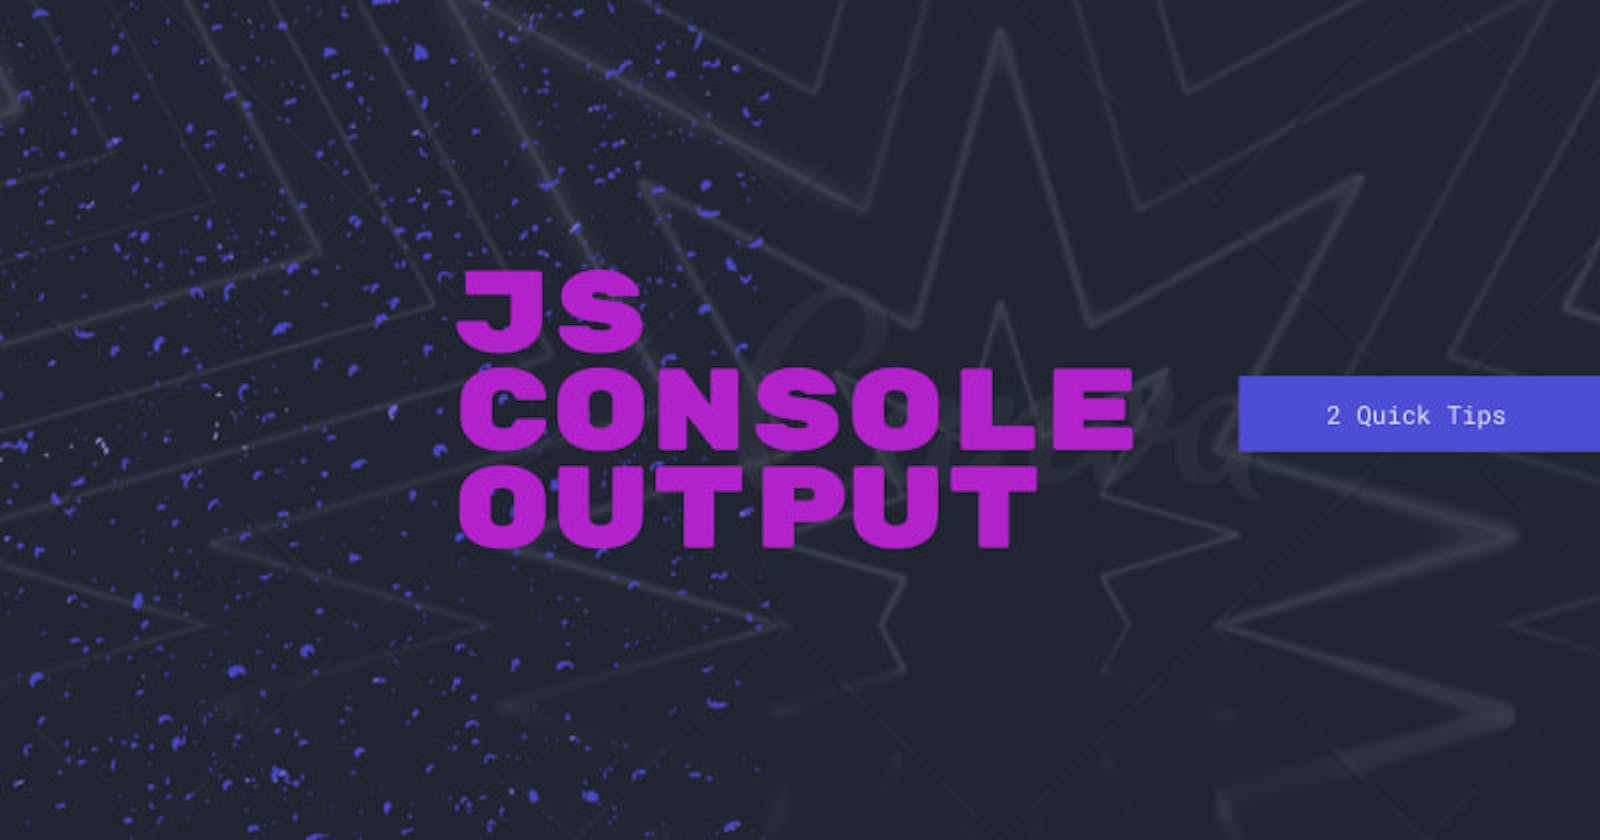 2 Quick Tips when working with JS console output